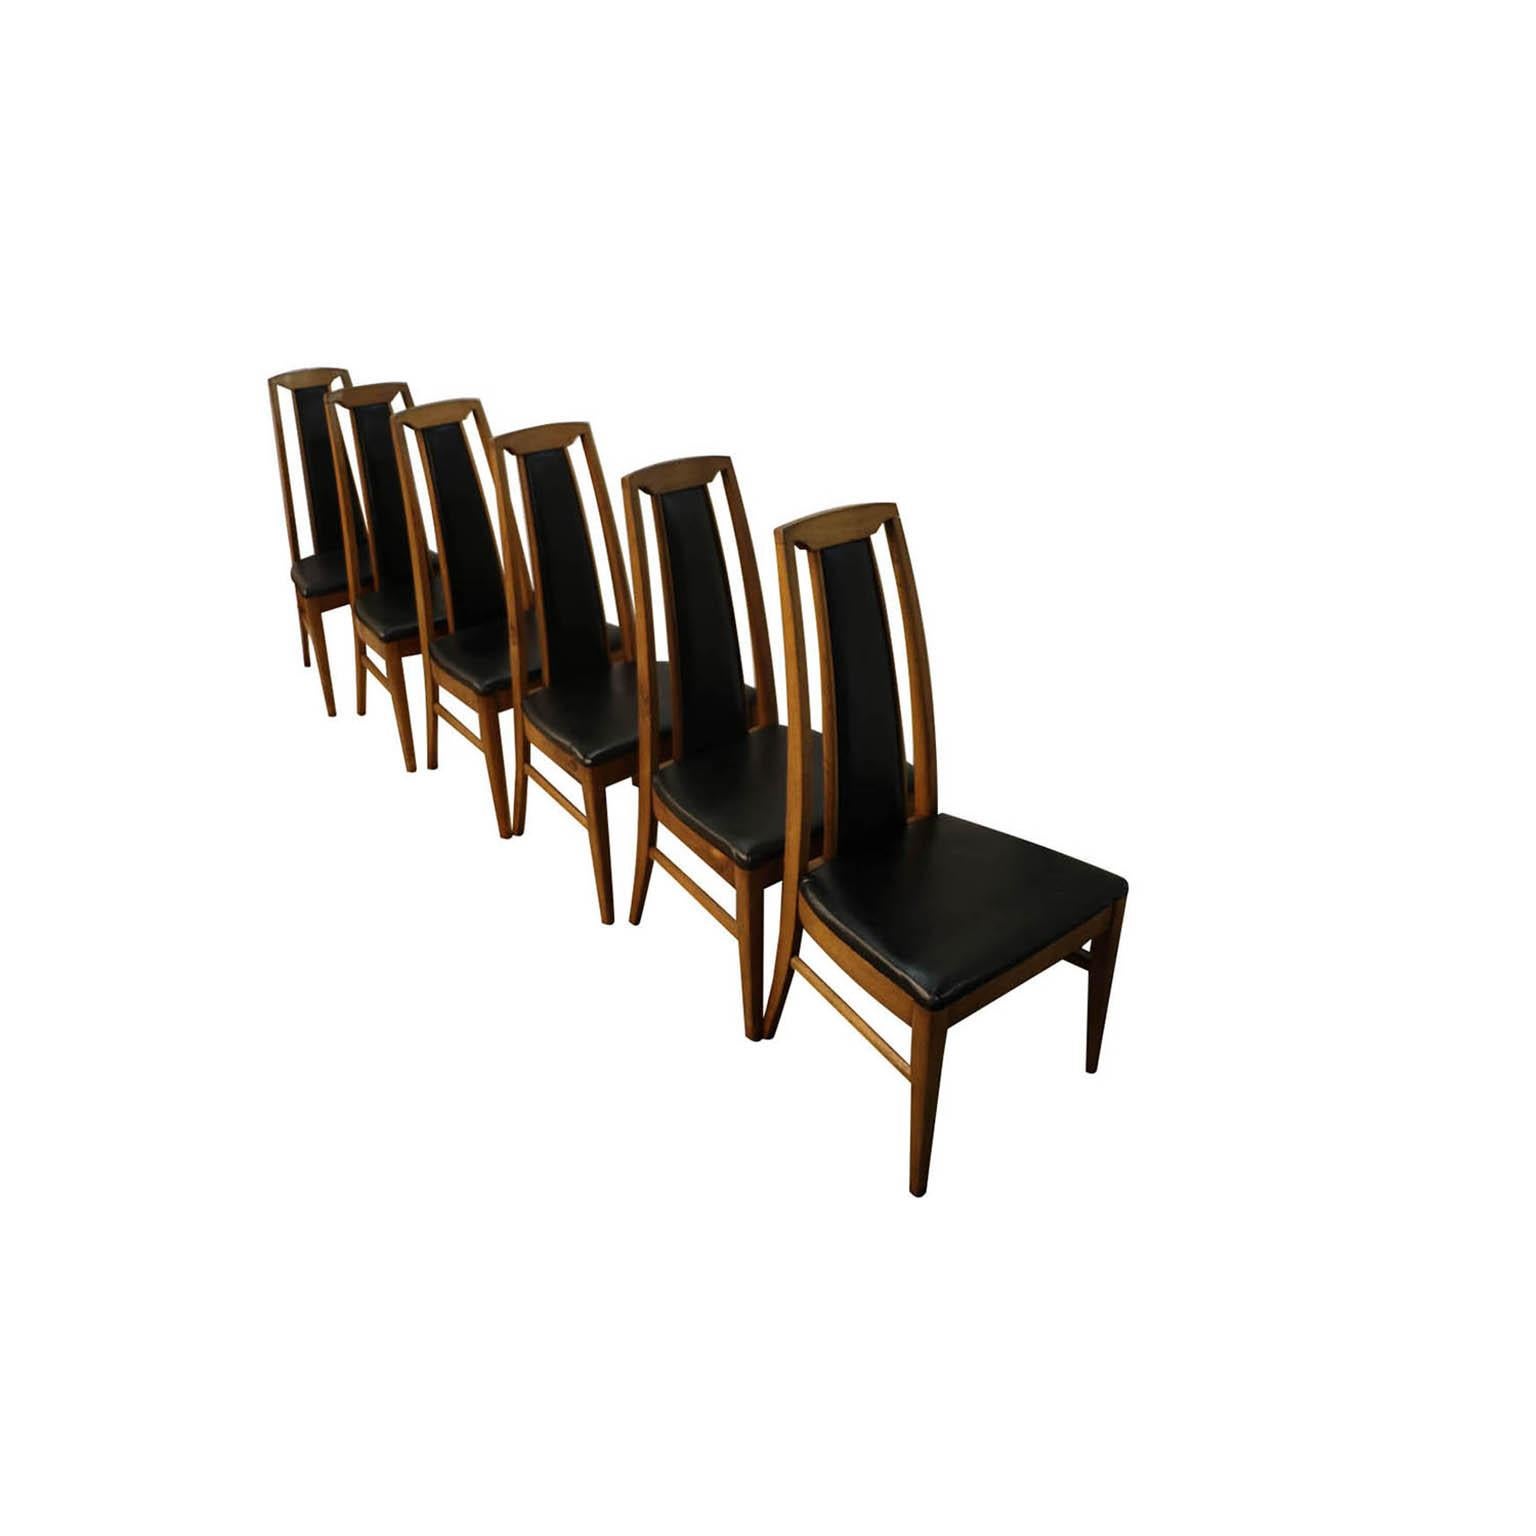 Sophisticated set of six Mid-Century Modern high back dining chairs, circa 1970s, USA. Featuring a striking combination of beautiful walnut wood and high backs with partial black upholstery. The comfortable and supportive high backrests and seats